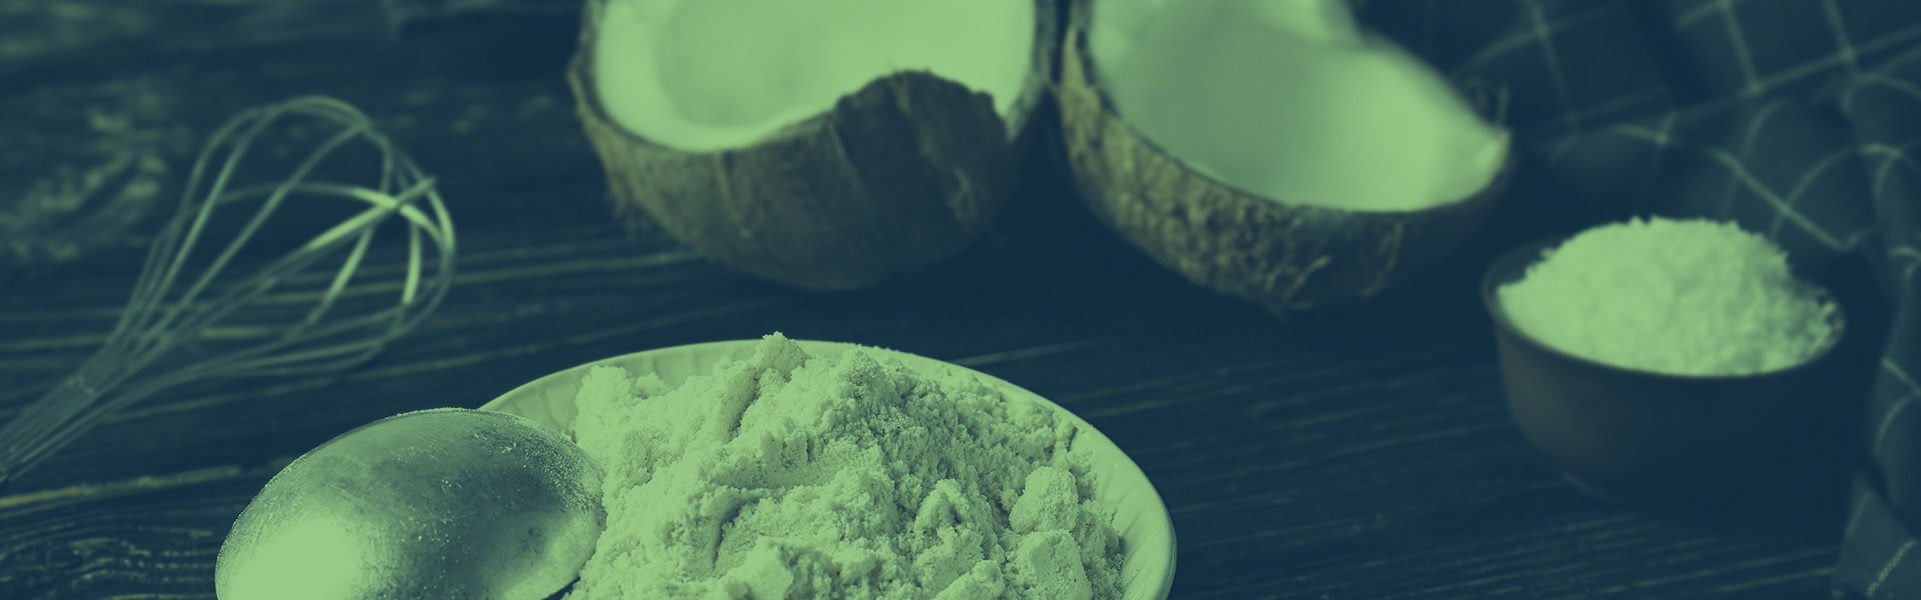 Coconut Flour: Nutrition, Benefits, and Uses